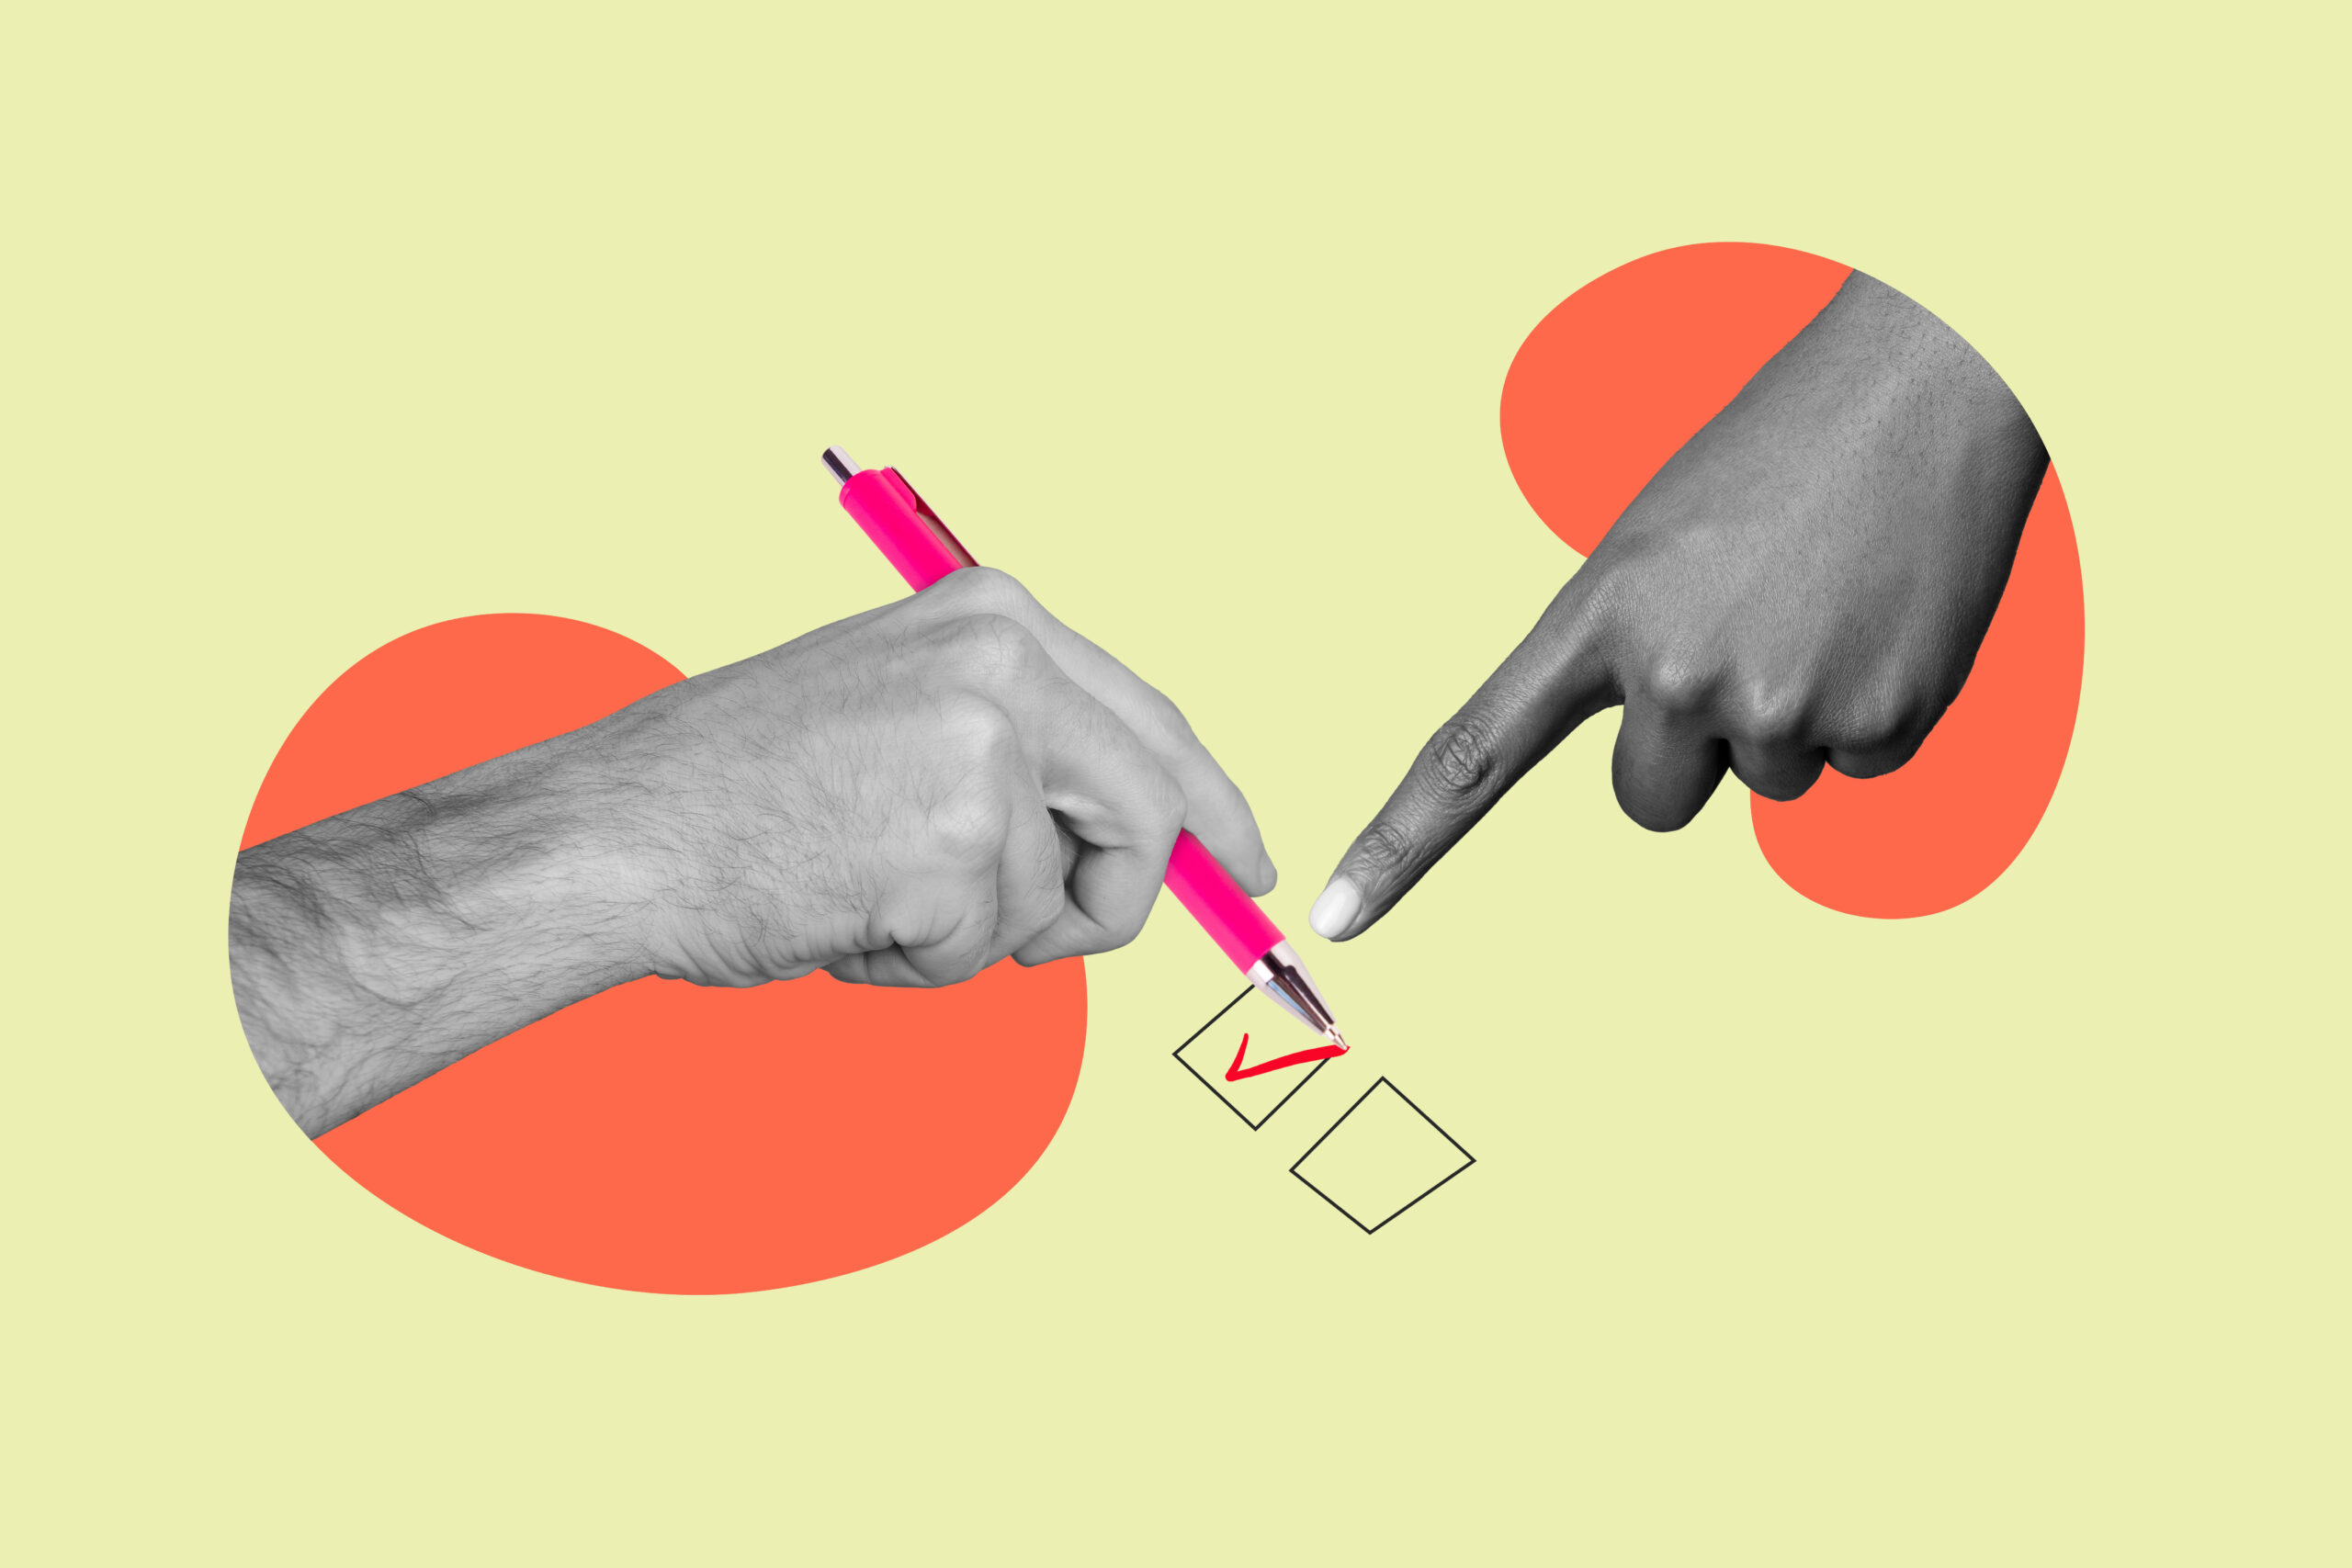 Within a cartoon background, one hand is holding a pen and checking a box while another hand is pointing its index finger at the checked box.